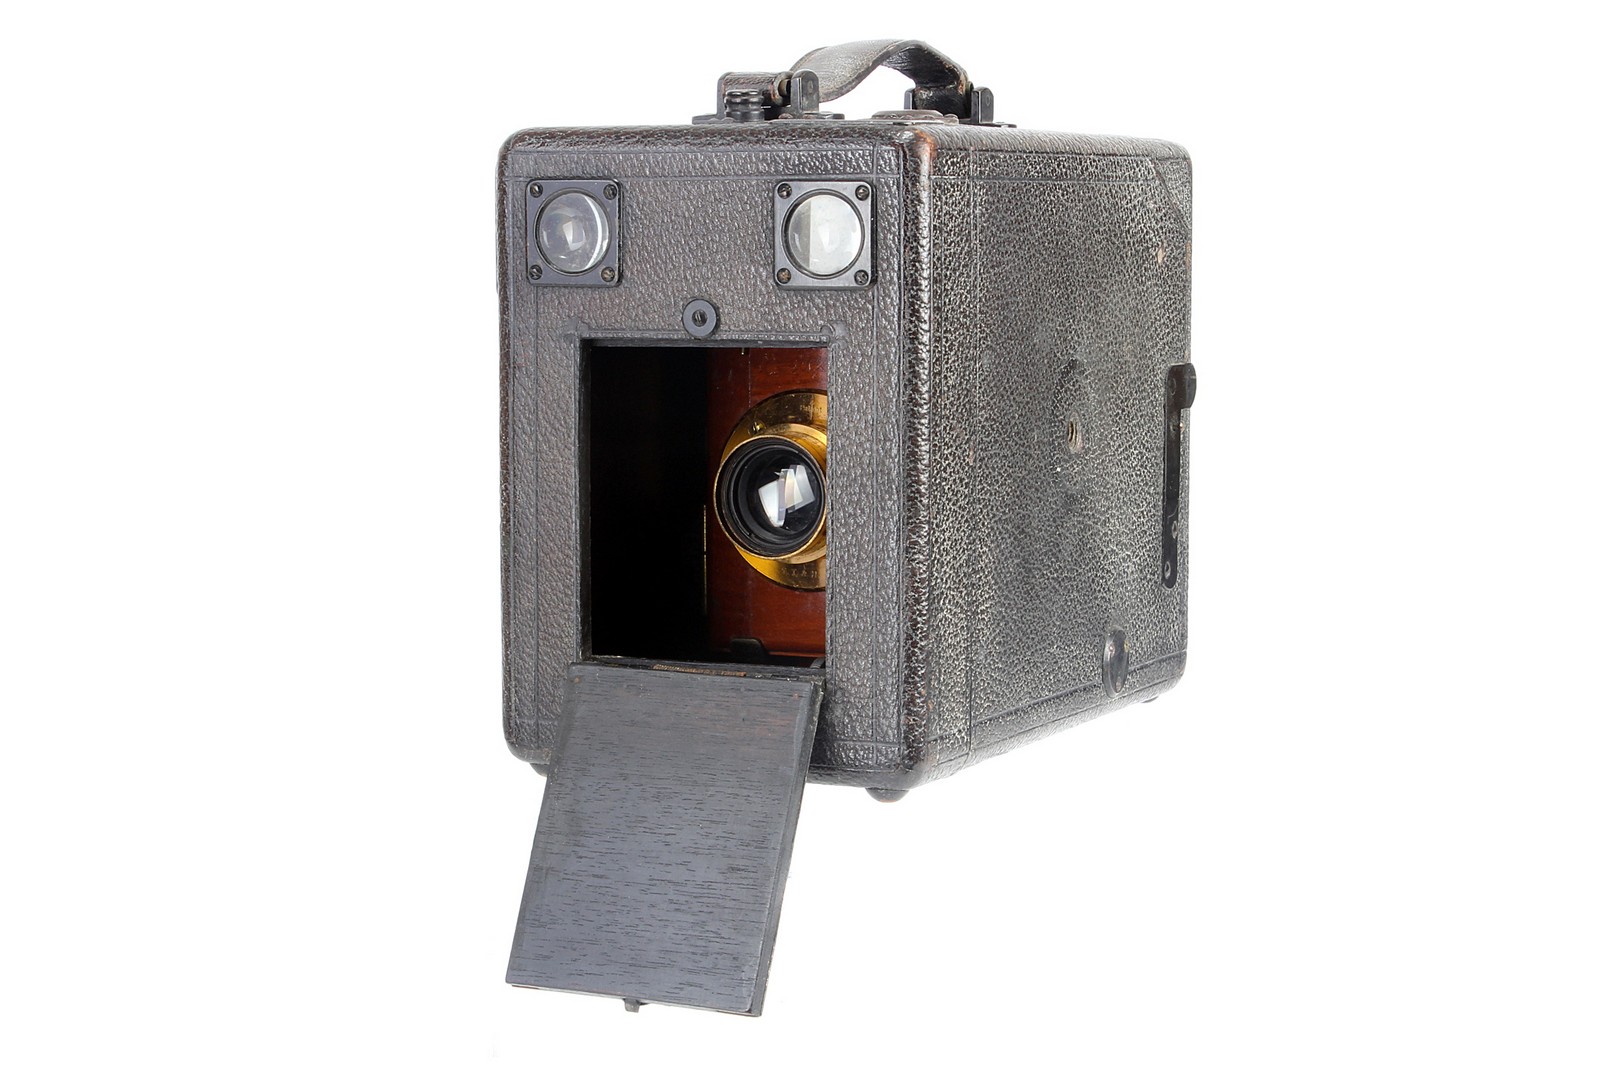 A J. T. Chapman ‘The British’ Detective Camera, 3¼x4¼”, with Taylor, Taylor & Hobson Cooke Series II